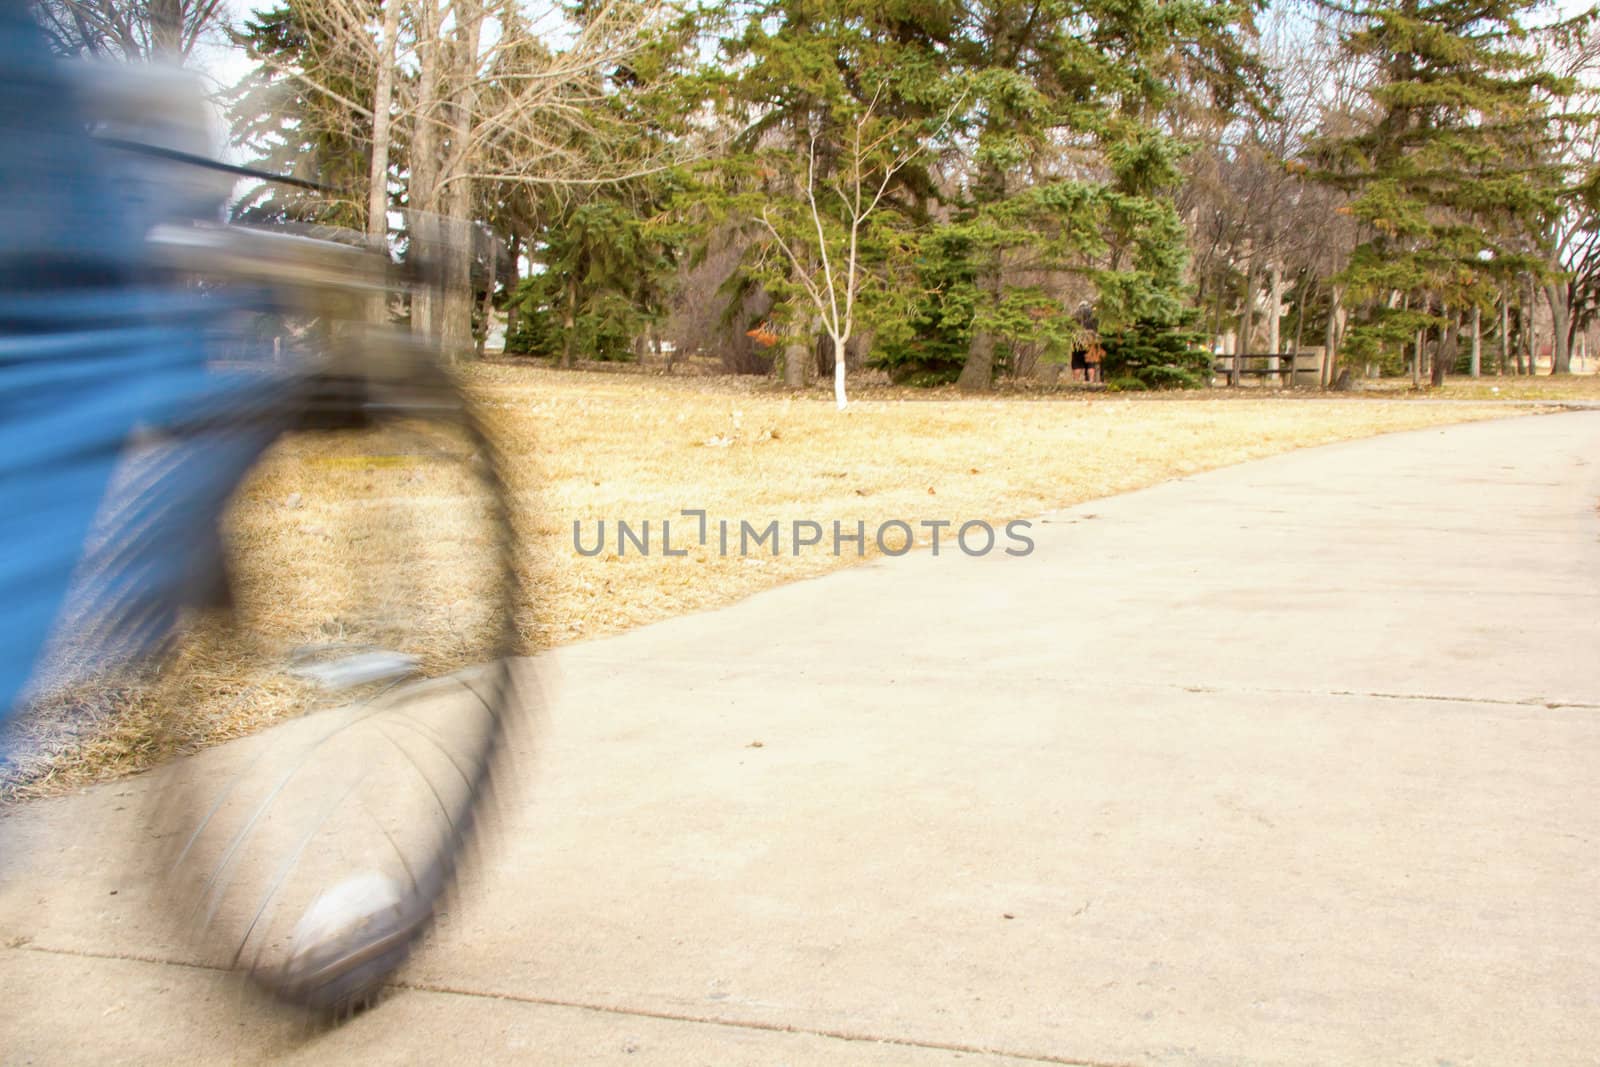 A young boy riding his mountain bike with motion blur